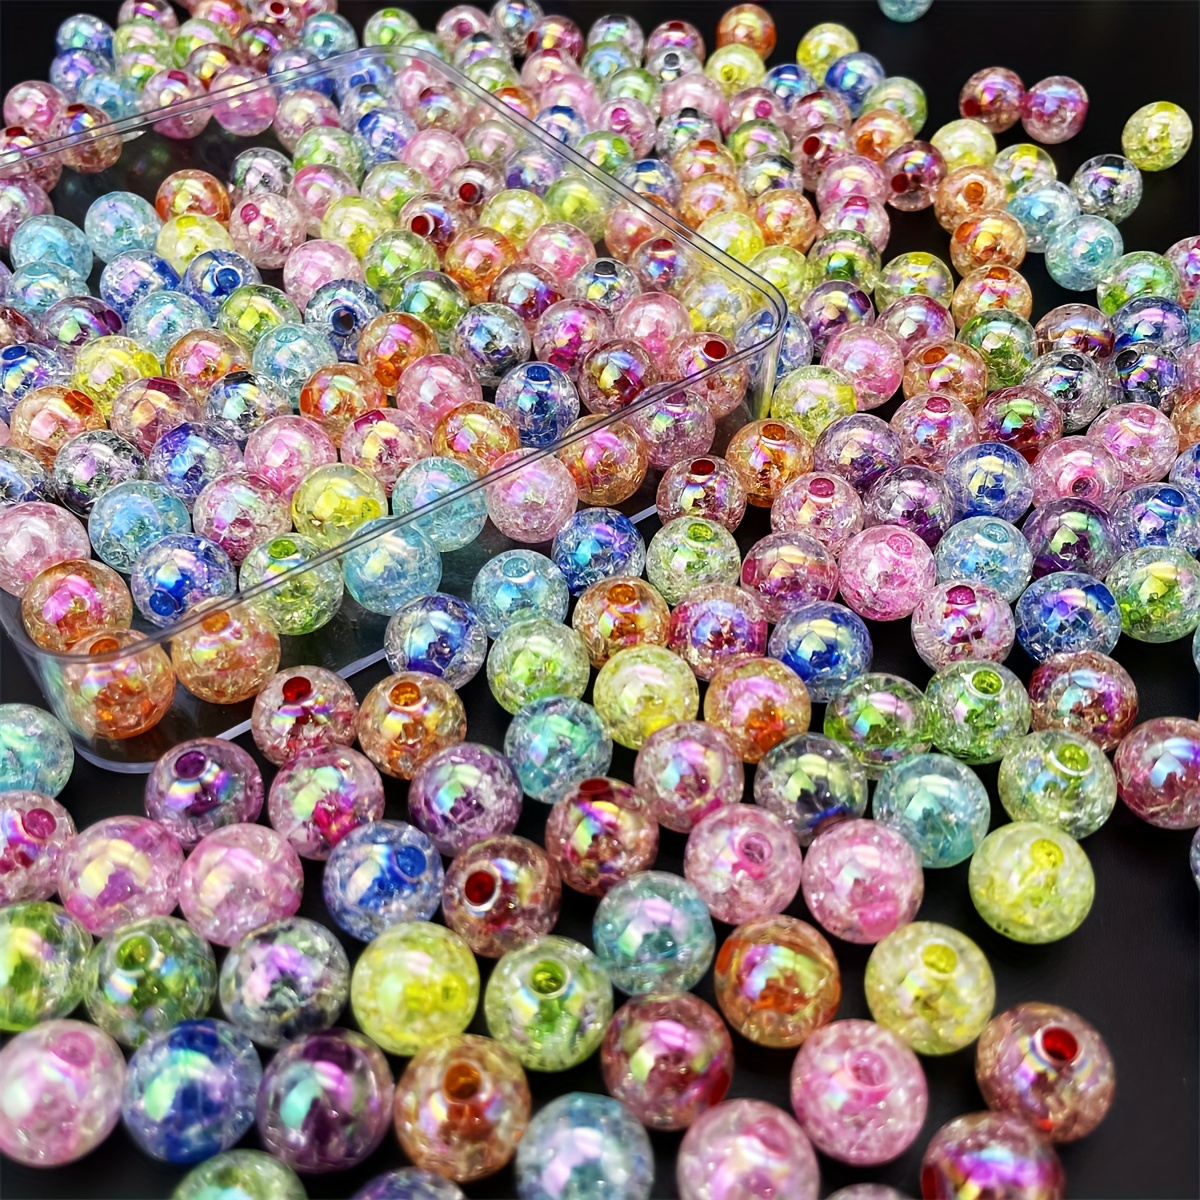 

20/16/12/8 Pcs Color Plated Acrylic Beads, Crackle Sugar Heart Round Loose Beads, Jewelry Making Diy Bracelet And Other Creative Handmade Craft, 14/16/18/20mm